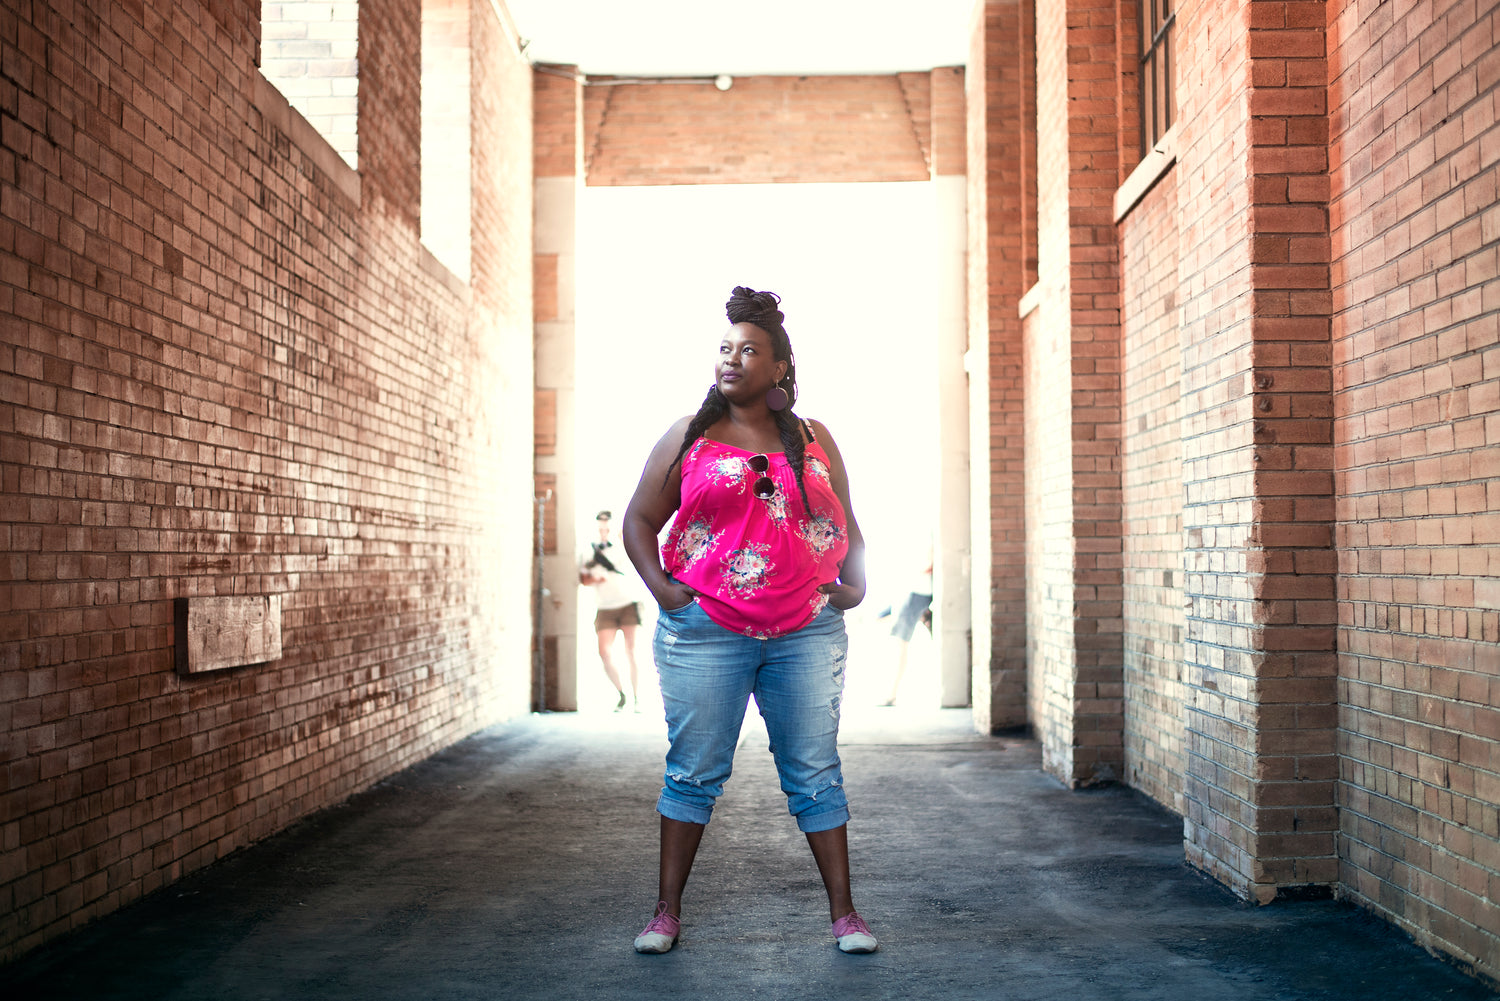 Beautiful Black woman with braids dressed in a bright pink shirt and cropped jeans